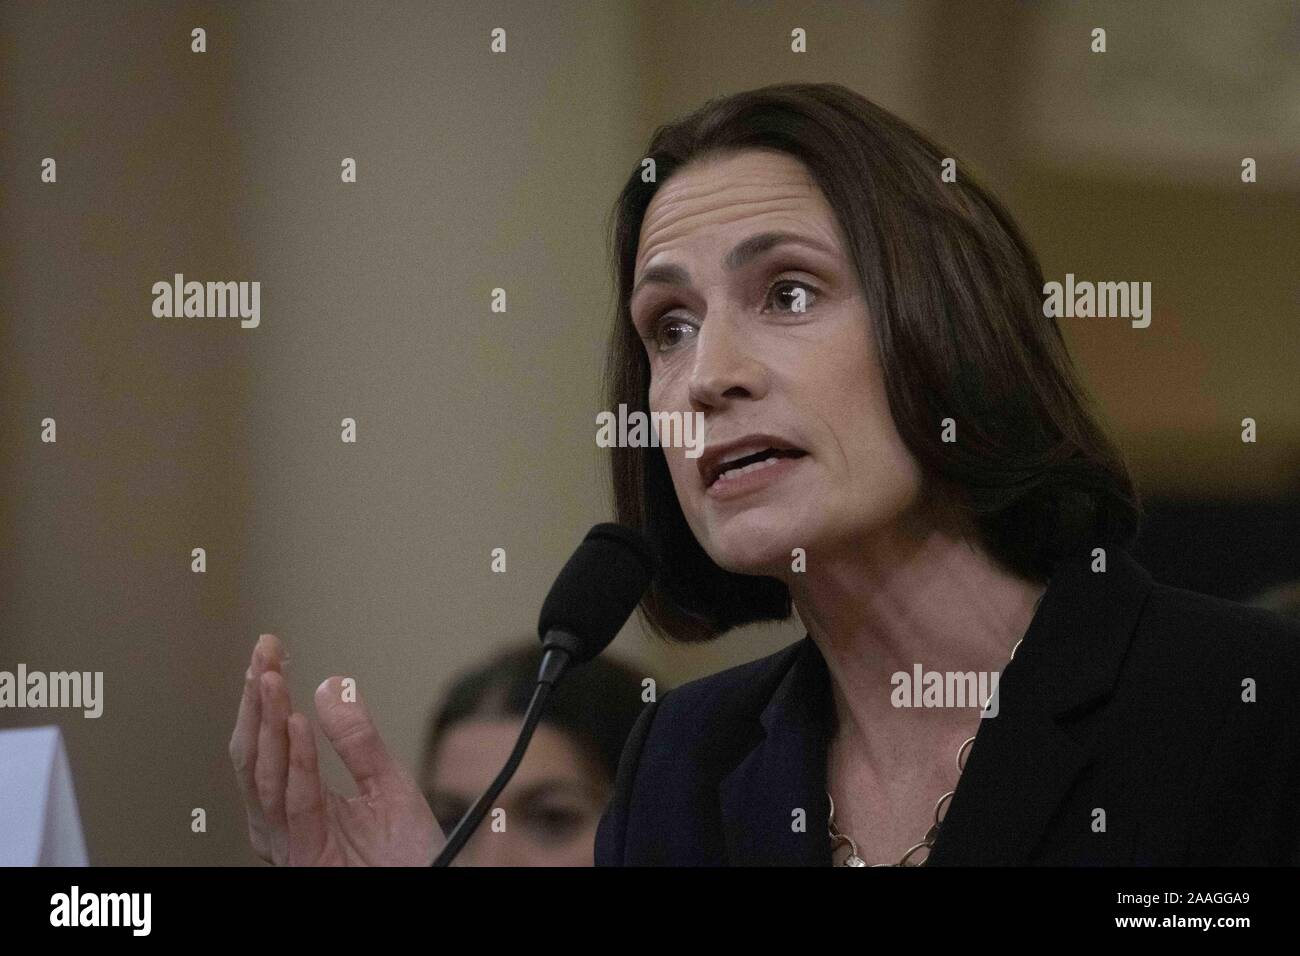 Washington, District of Columbia, USA. 21st Nov, 2019. Former national-security official Dr. FIONA HILL testifies before the House Intelligence Committee. Hill warned lawmakers against promoting a "fictional narrative"" that Ukraine interfered in the 2016 U.S. elections. She called such a theory Russian propaganda. November 21, 2019 Credit: Douglas Christian/ZUMA Wire/Alamy Live News Stock Photo